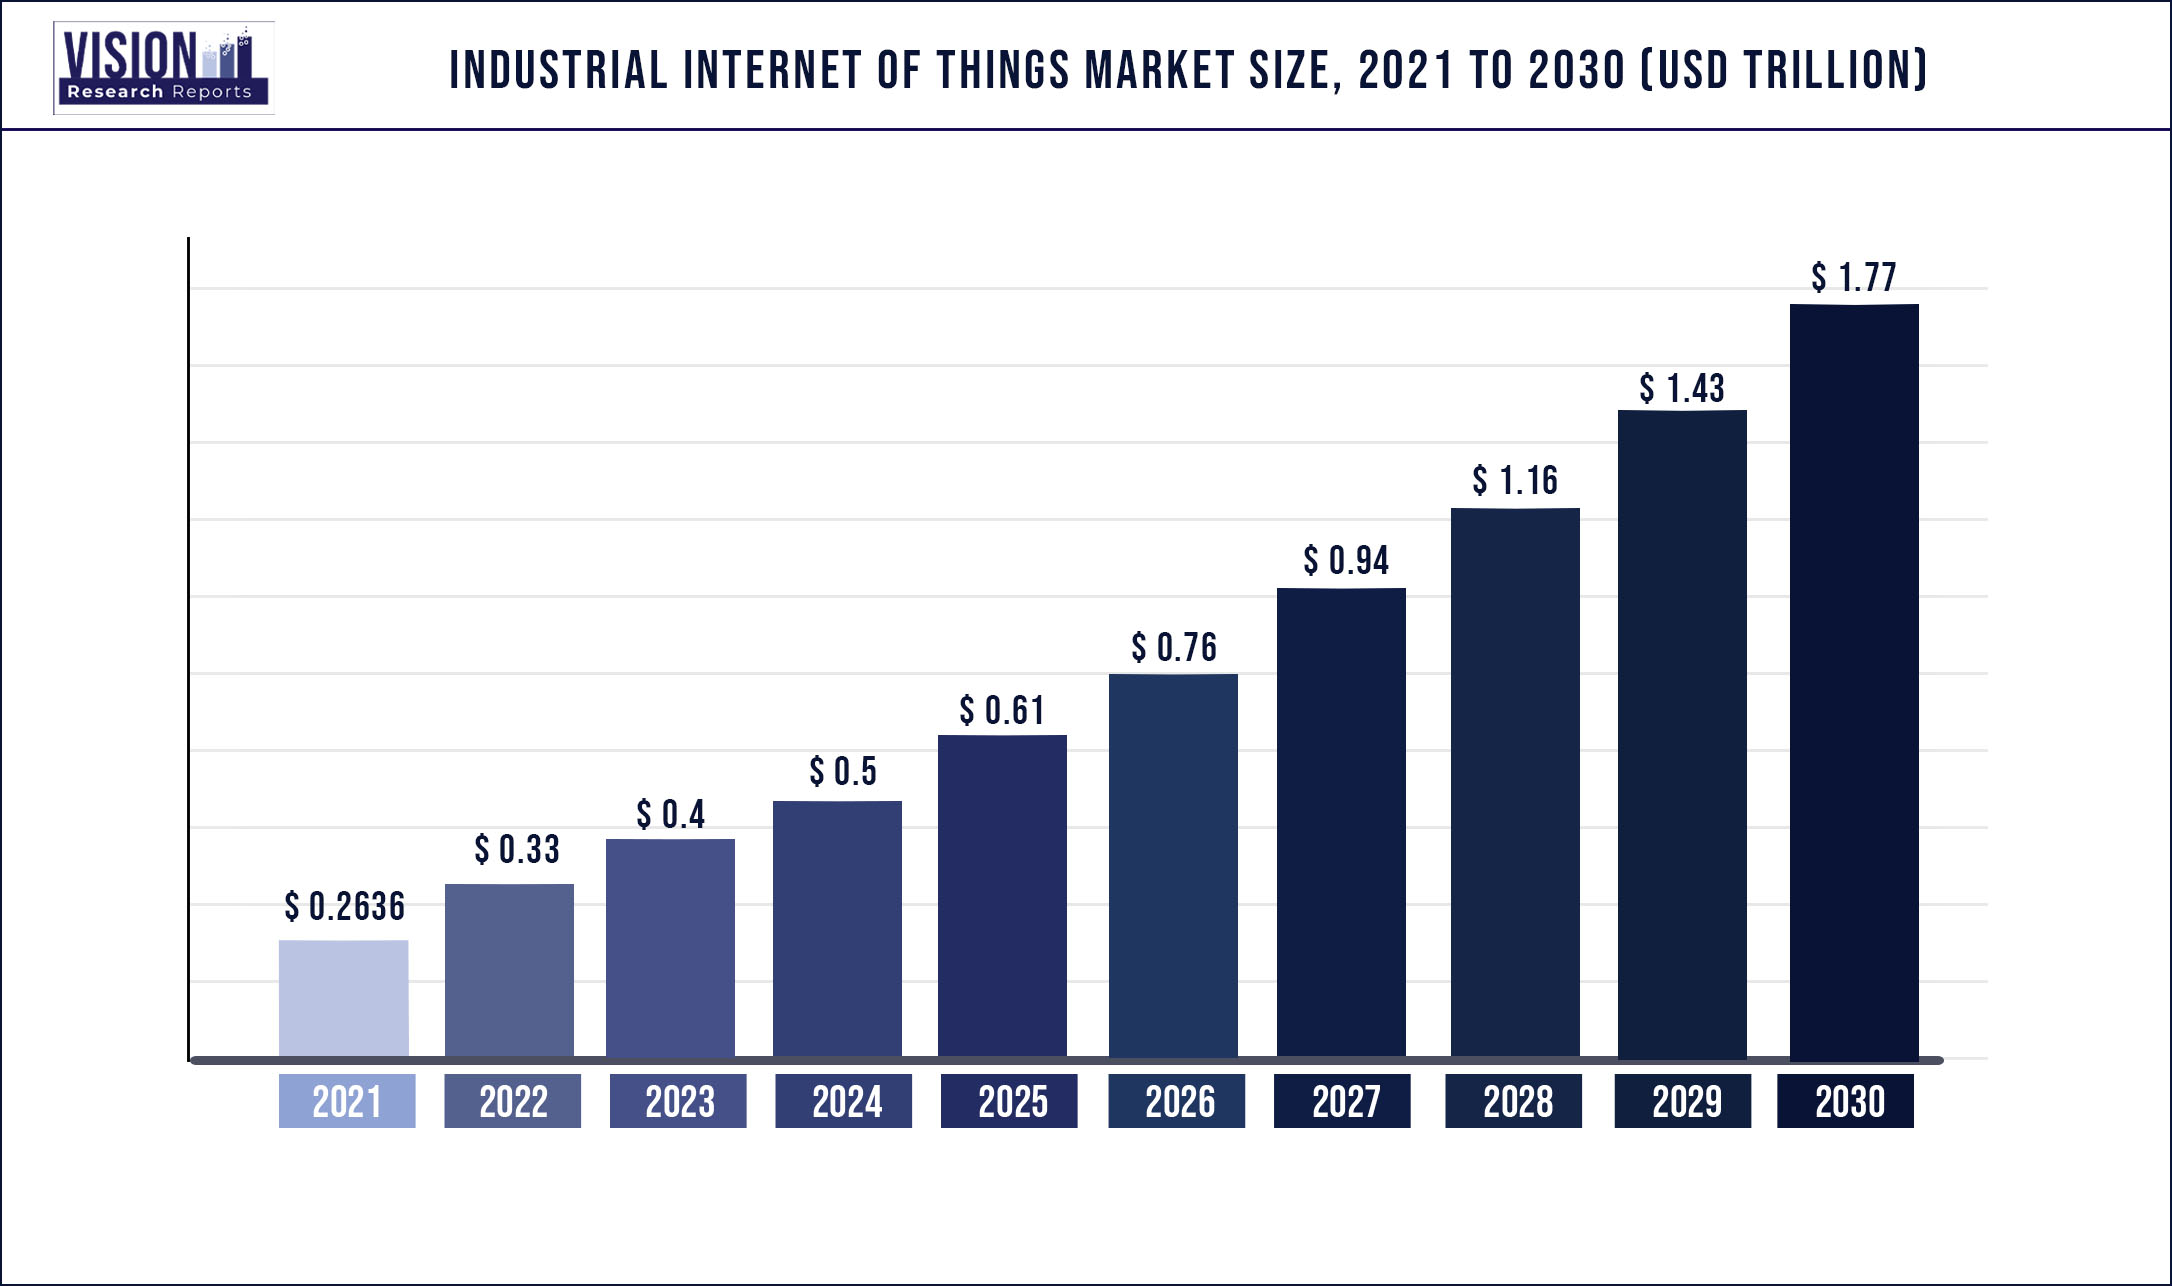 Industrial Internet Of Things Market Size 2021 to 2030